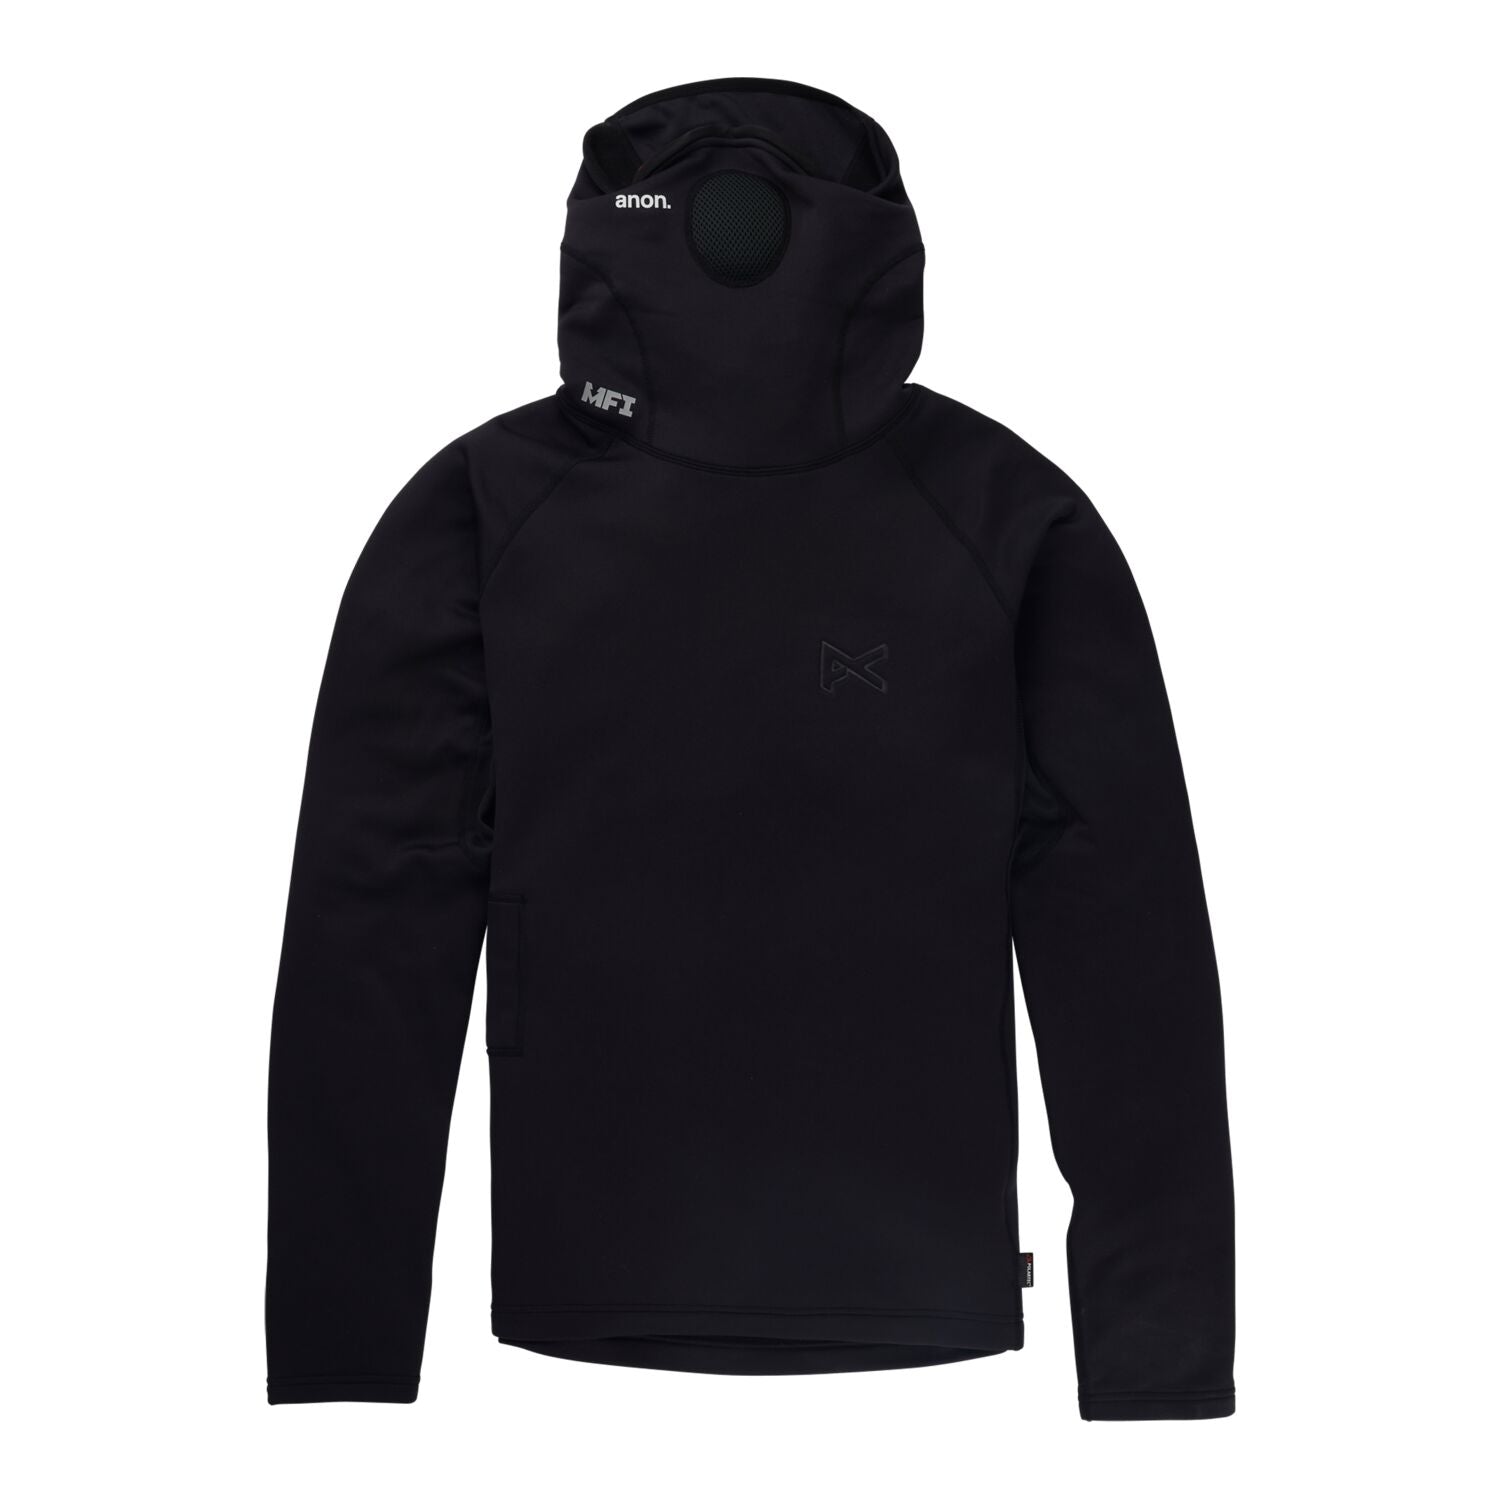 Anon MFI Power Dry Long Sleeve Base Layer Top Black Base Layer Tops